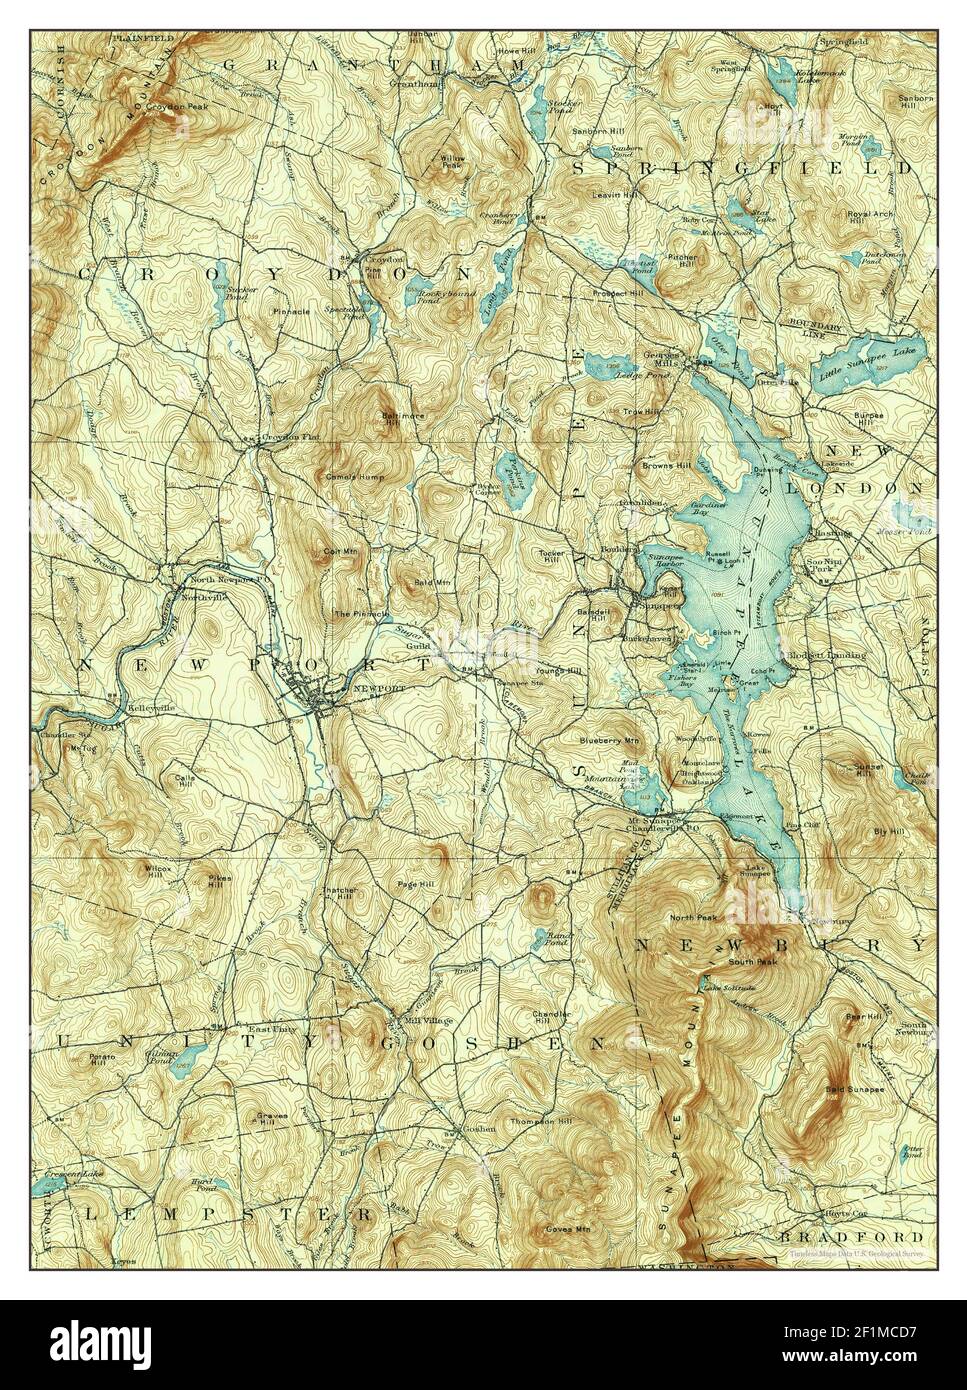 Sunapee, New Hampshire, map 1907, 1:62500, United States of America by Timeless Maps, data U.S. Geological Survey Stock Photo